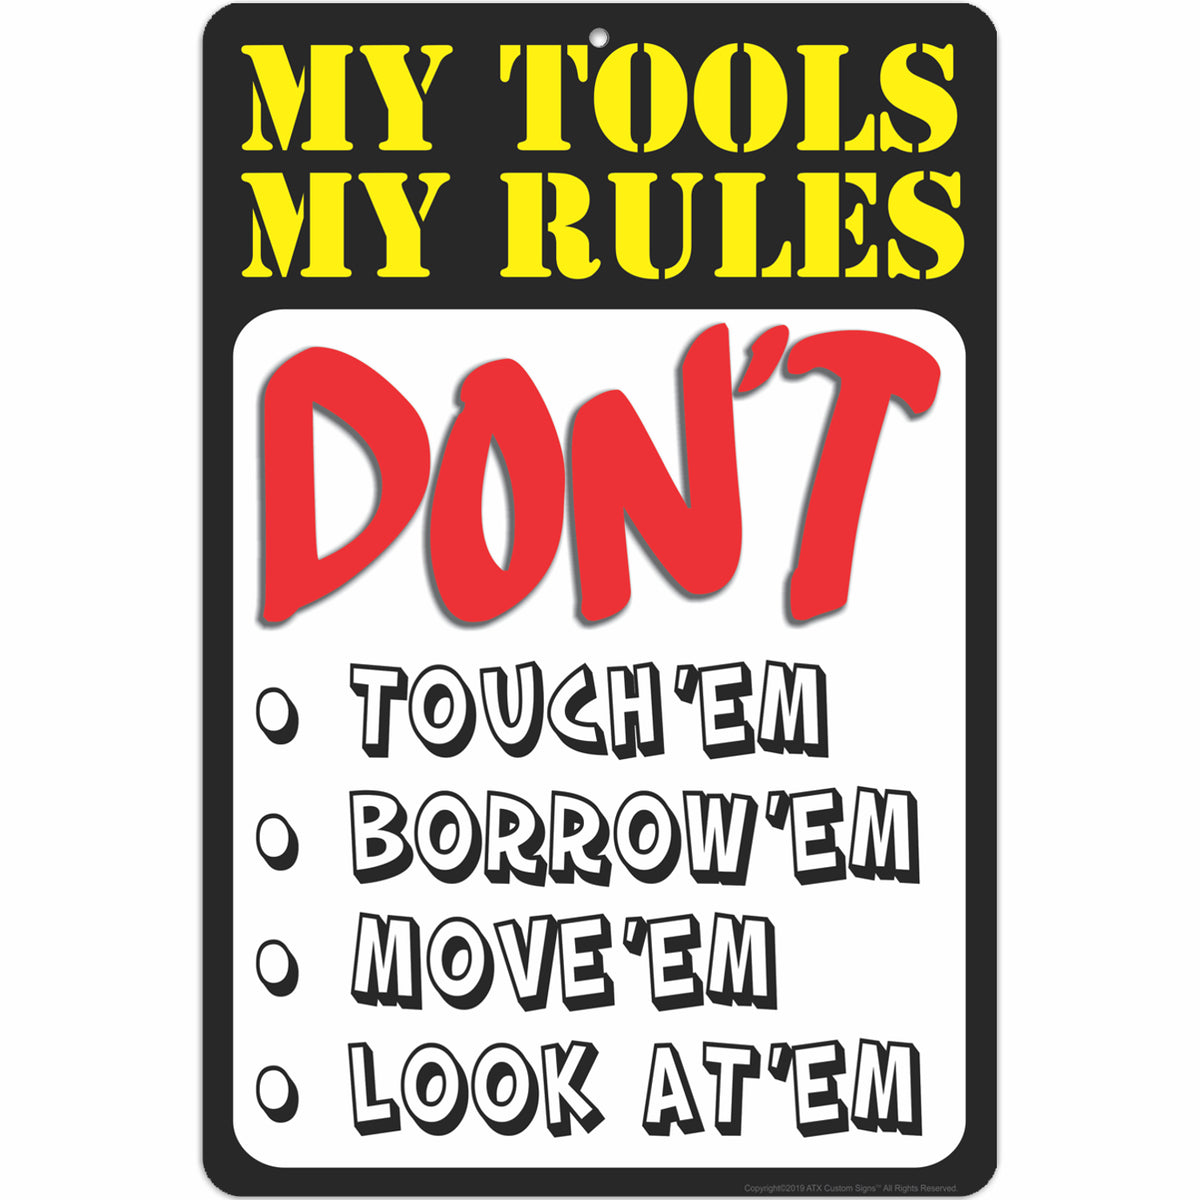 My Tools Rule Metal Wall Thermometer Sign